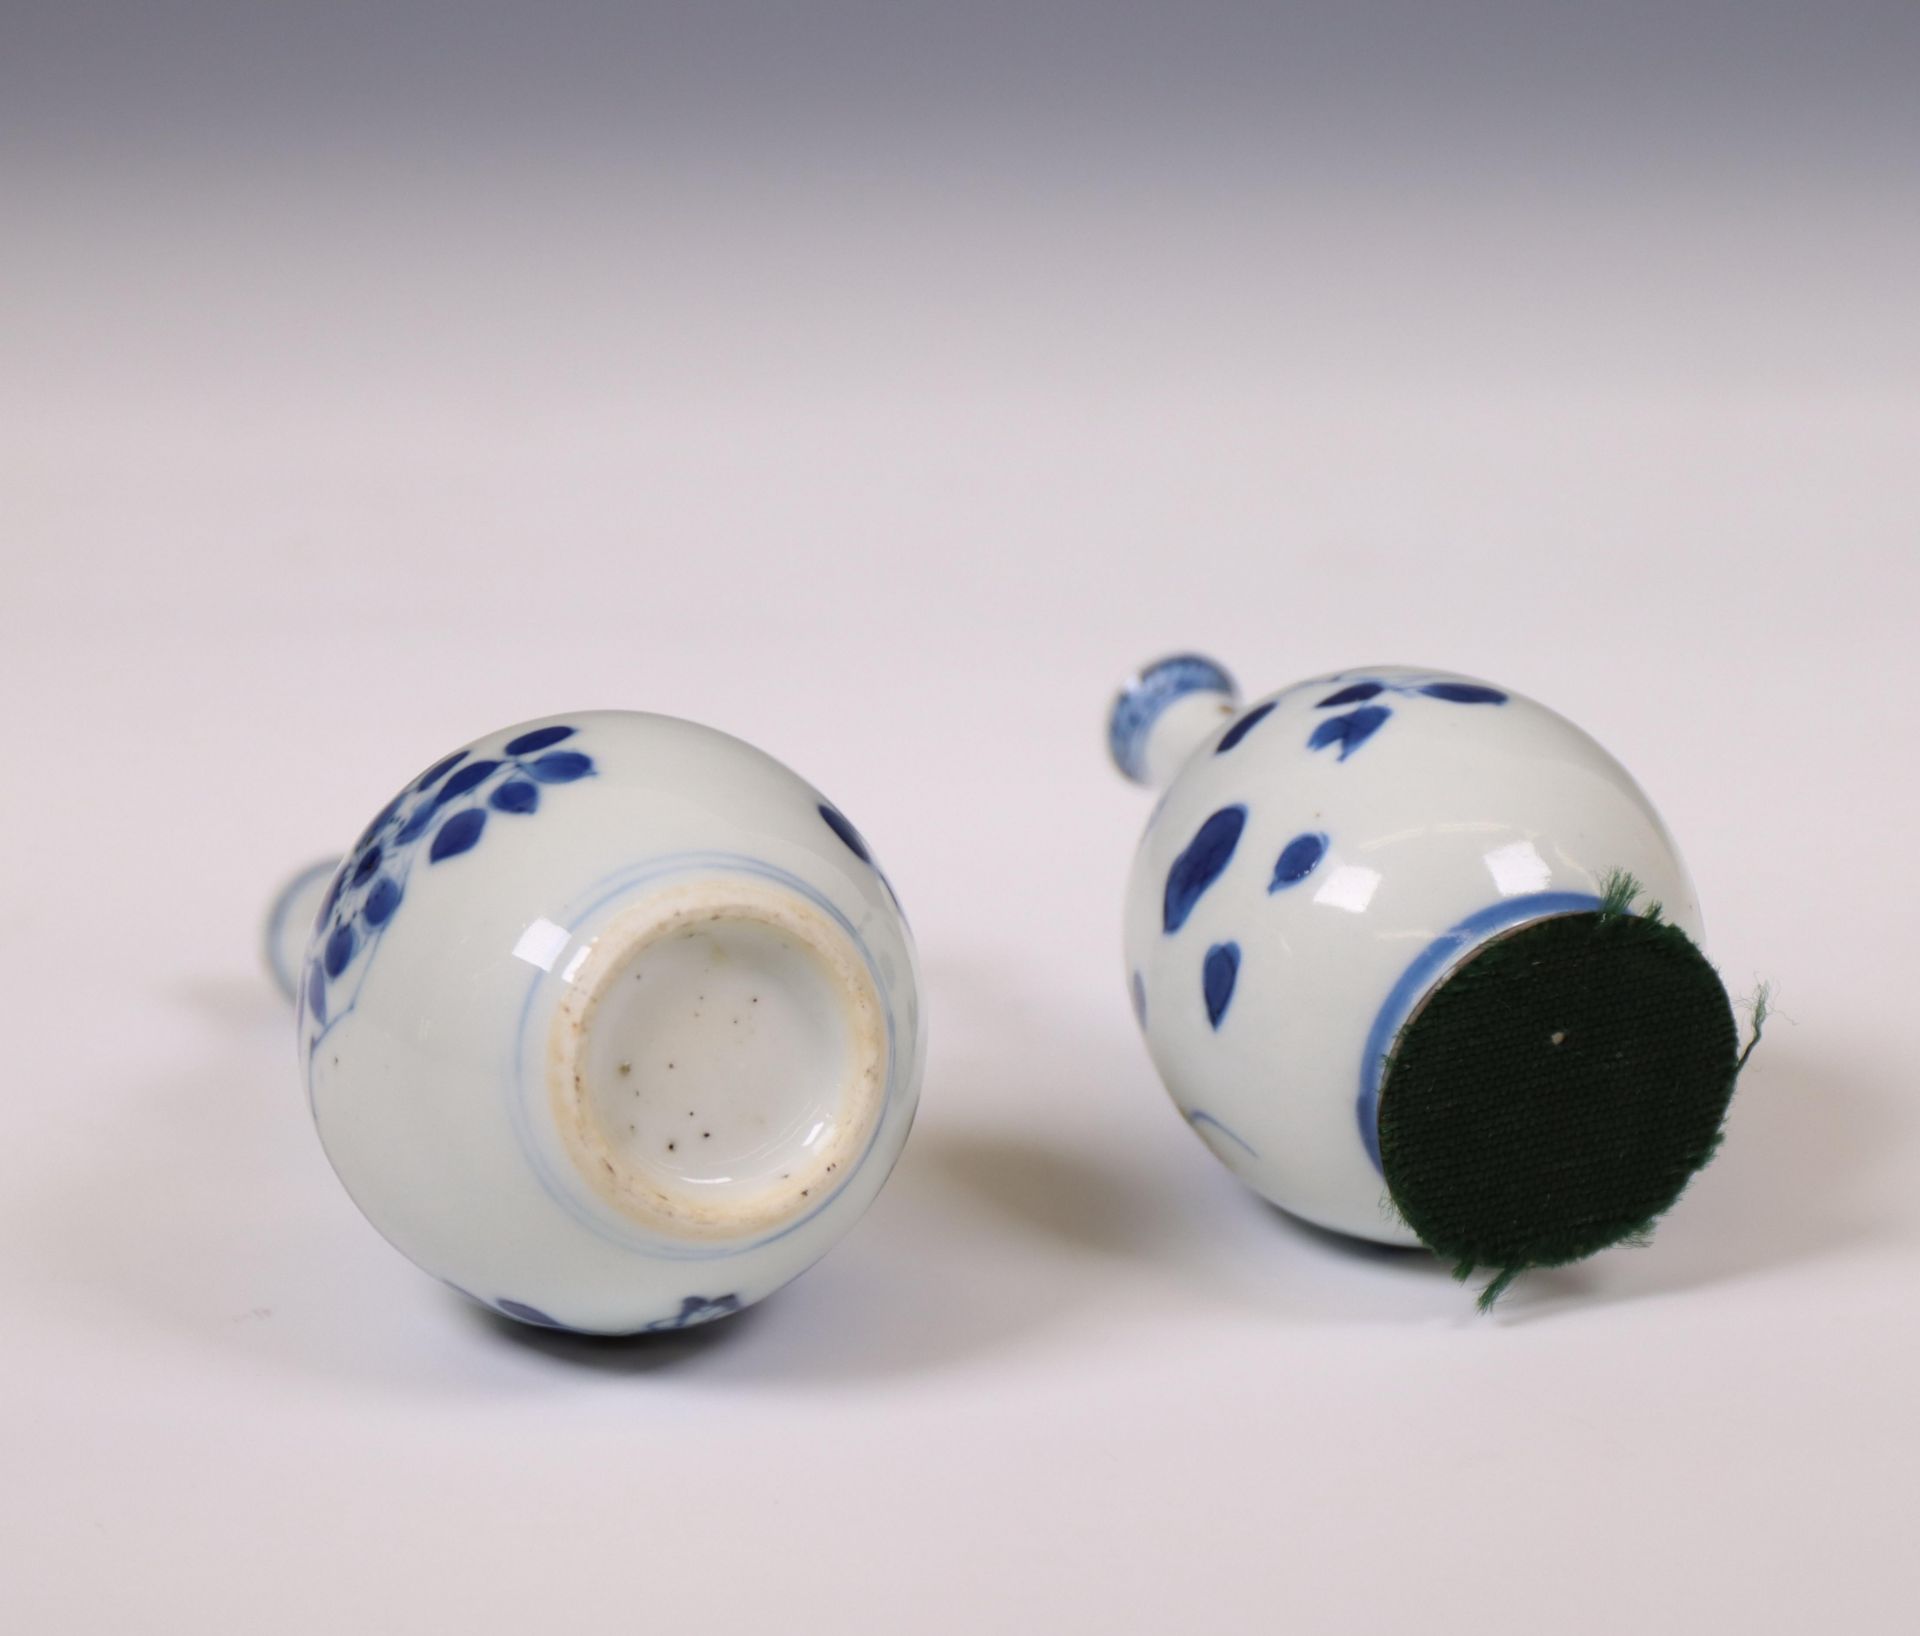 China, two blue and white porcelain vases, Kangxi period (1662-1722), - Image 3 of 4